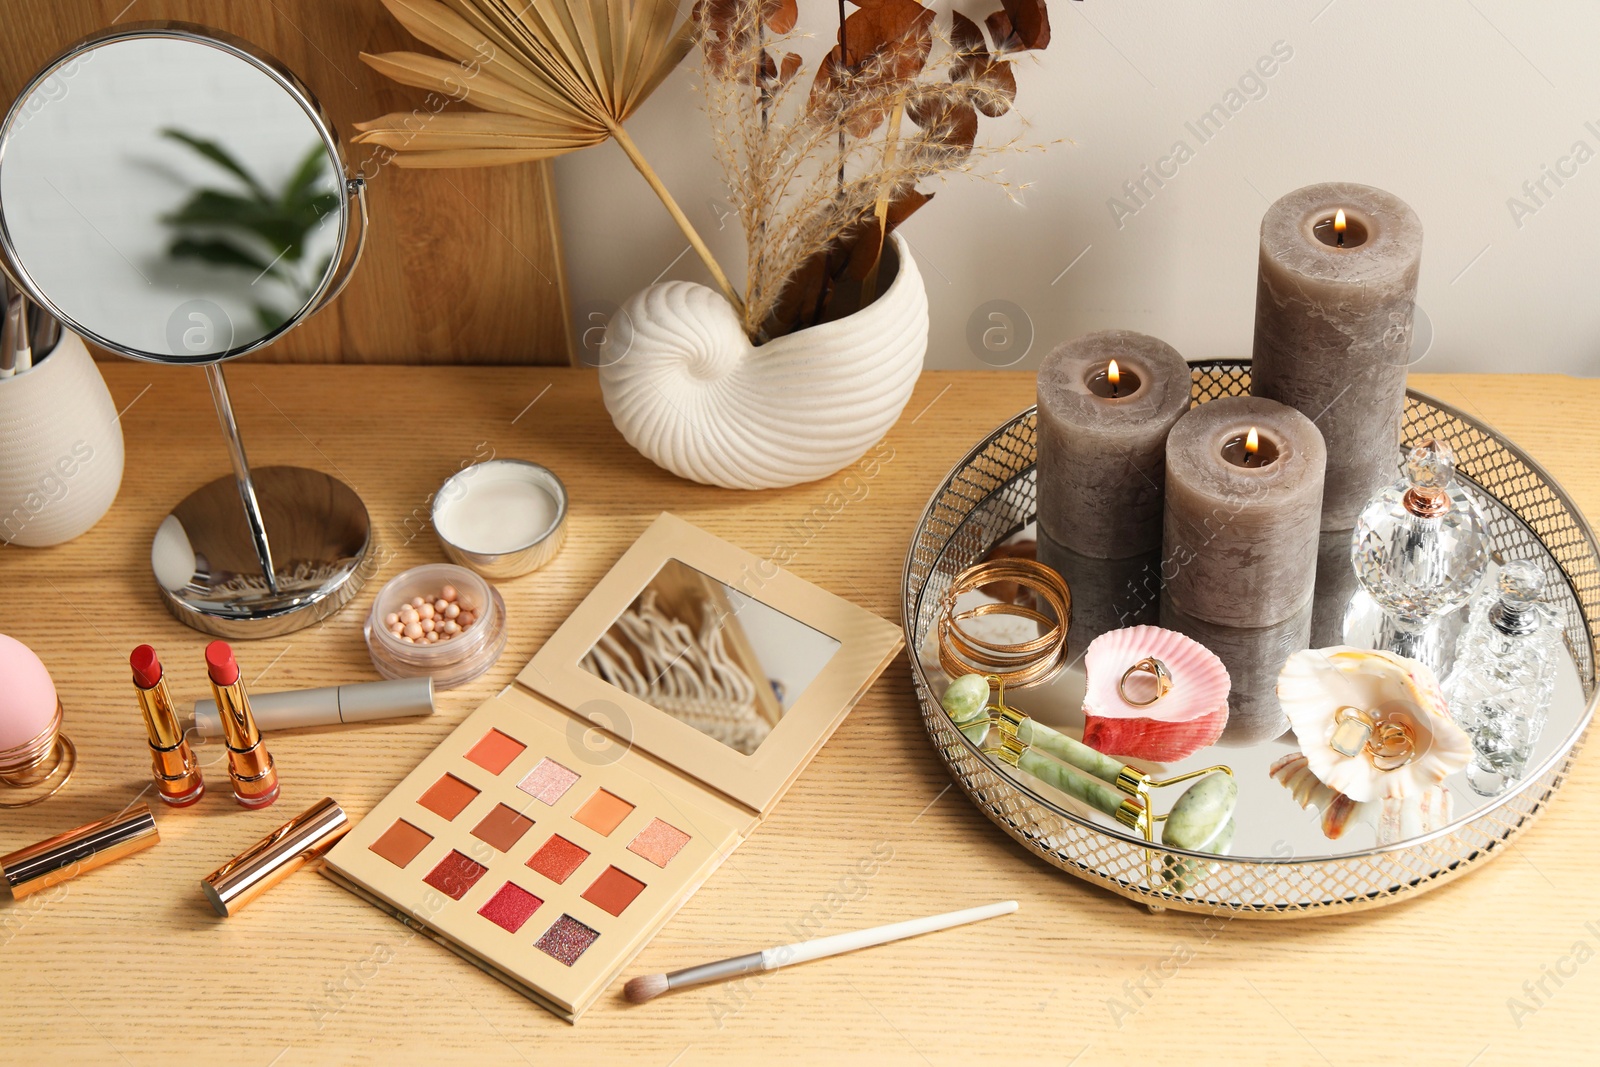 Photo of Perfumes, burning candles, jewelry and makeup products on wooden dressing table